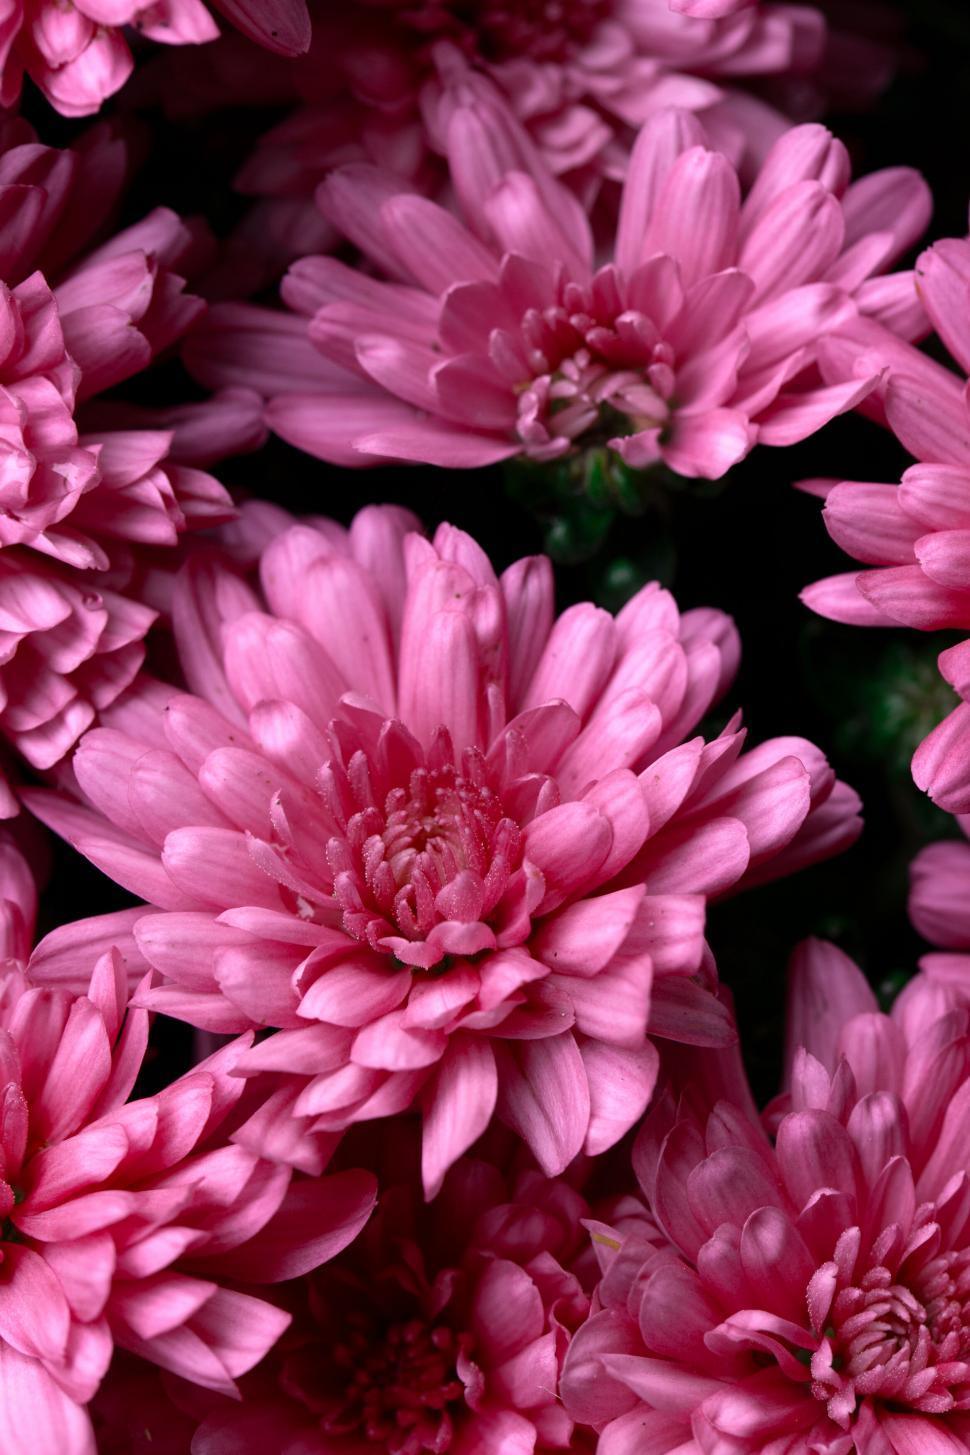 Free Image of Vibrant pink flowers in dark background 